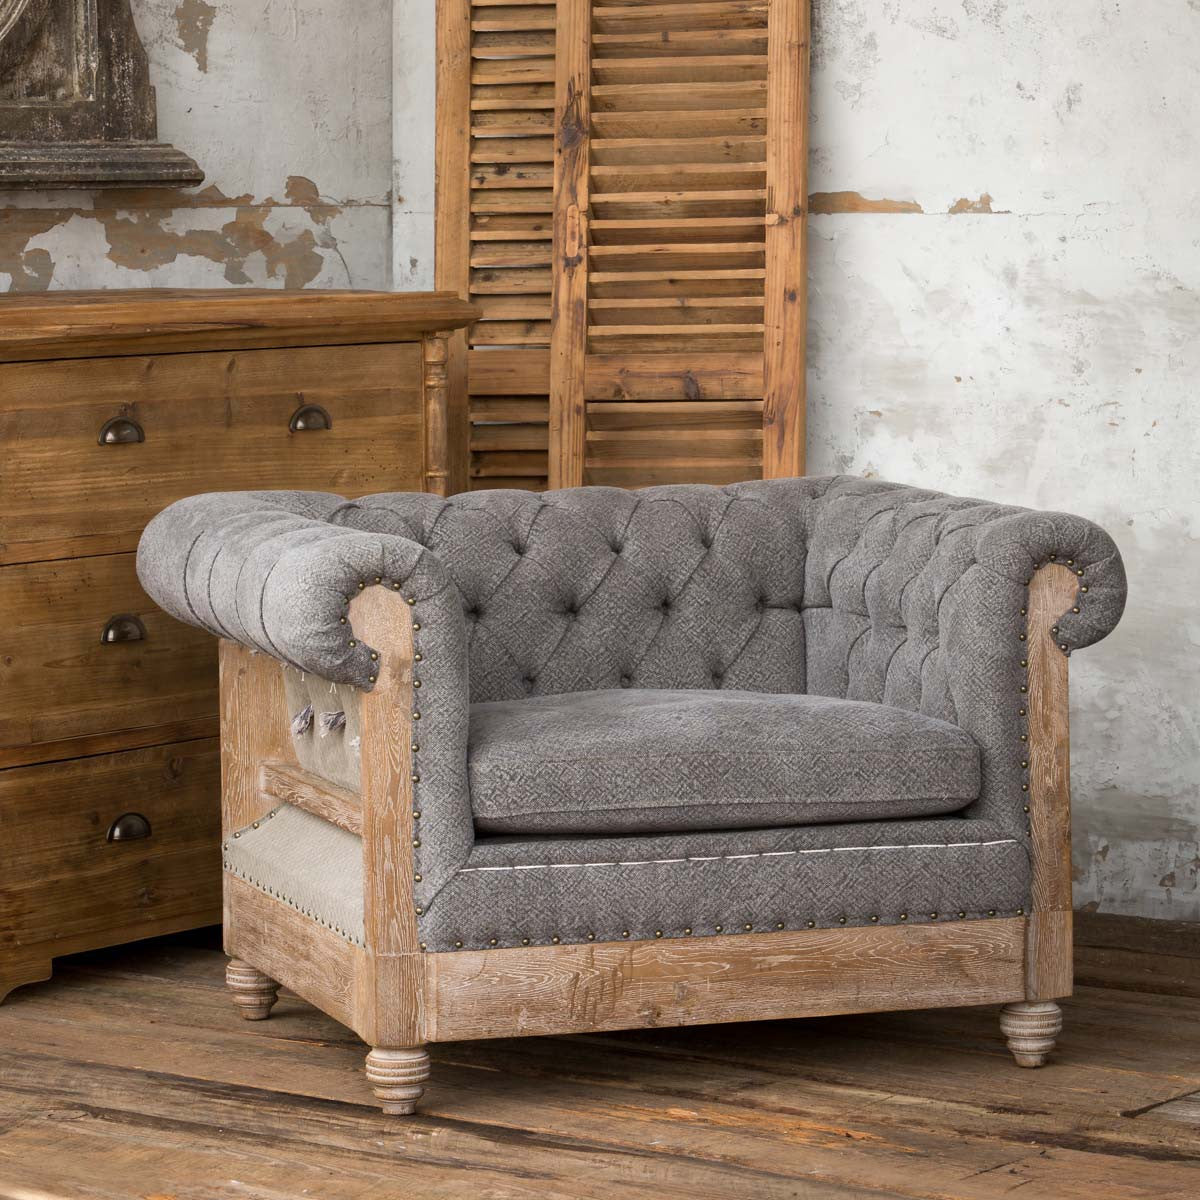 Restoration Hardware deconstructed chair for sale, Restoration Hardware deconstructed chesterfield